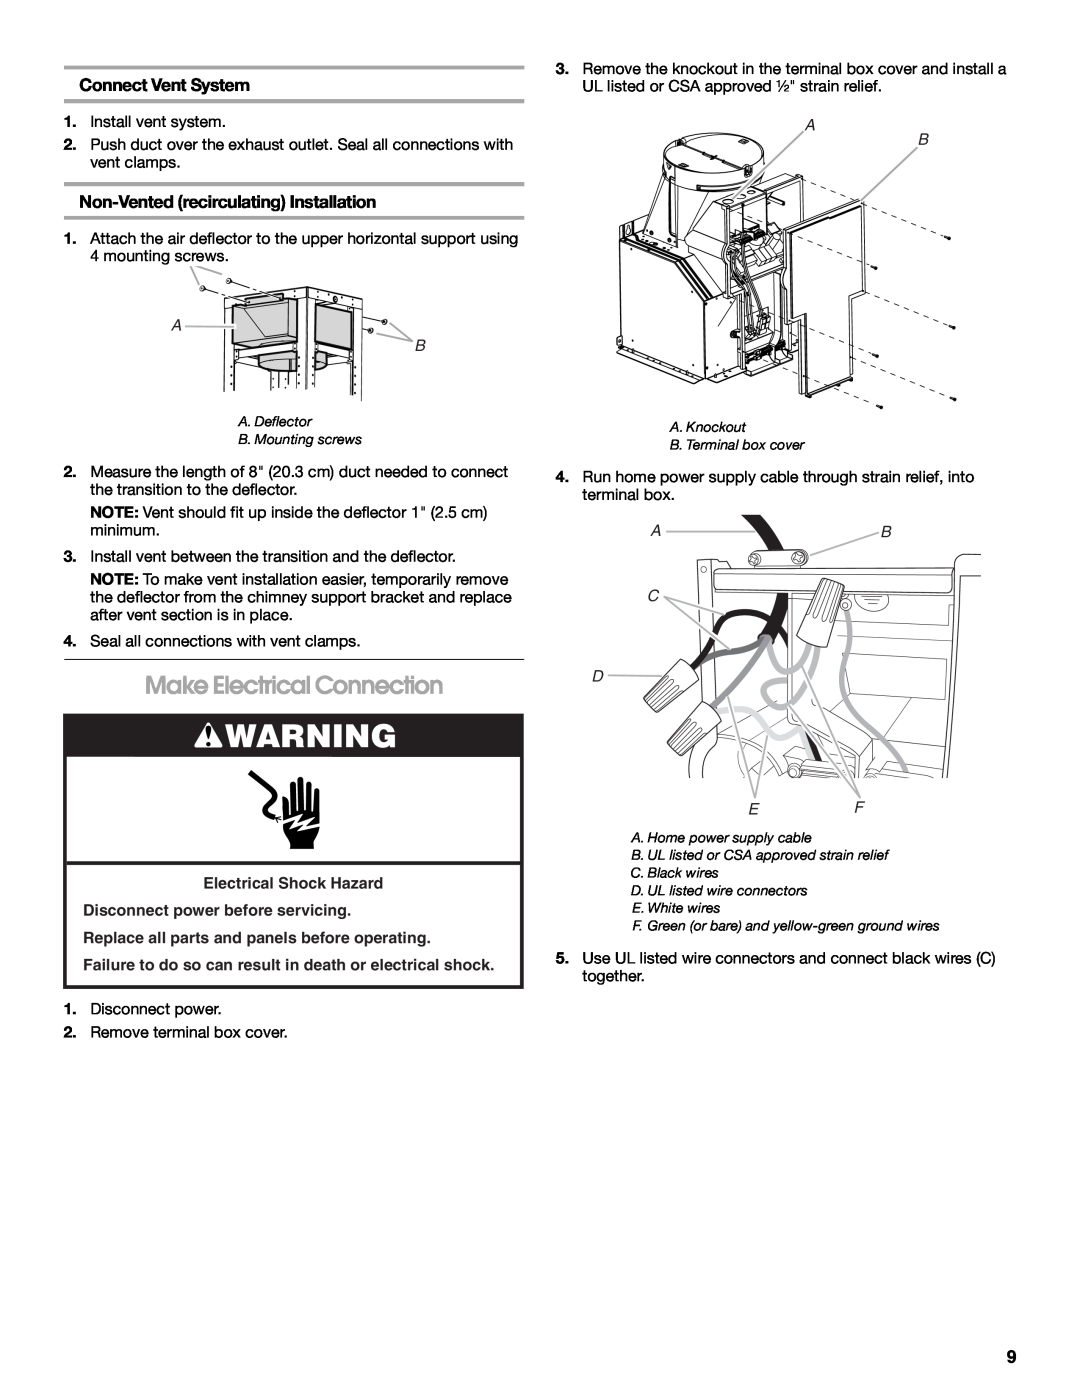 Jenn-Air W10274319E Make Electrical Connection, Connect Vent System, Non-Ventedrecirculating Installation, A B C D Ef 